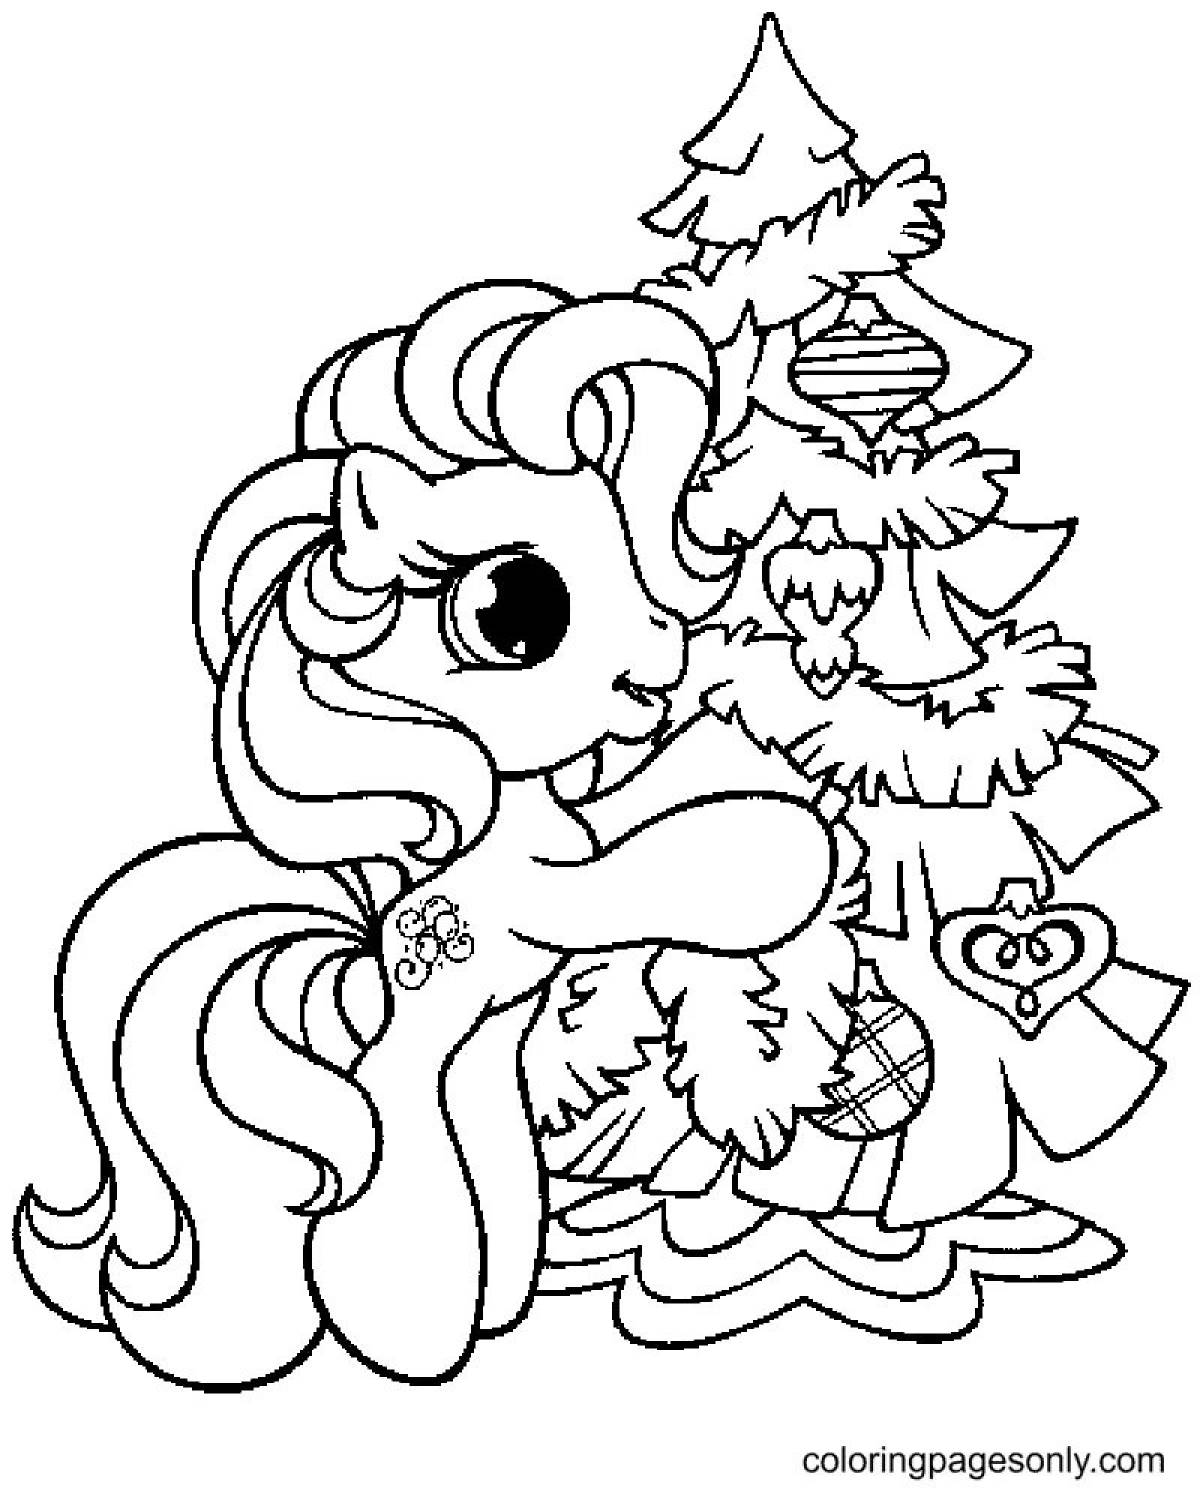 Finished Christmas unicorn coloring book